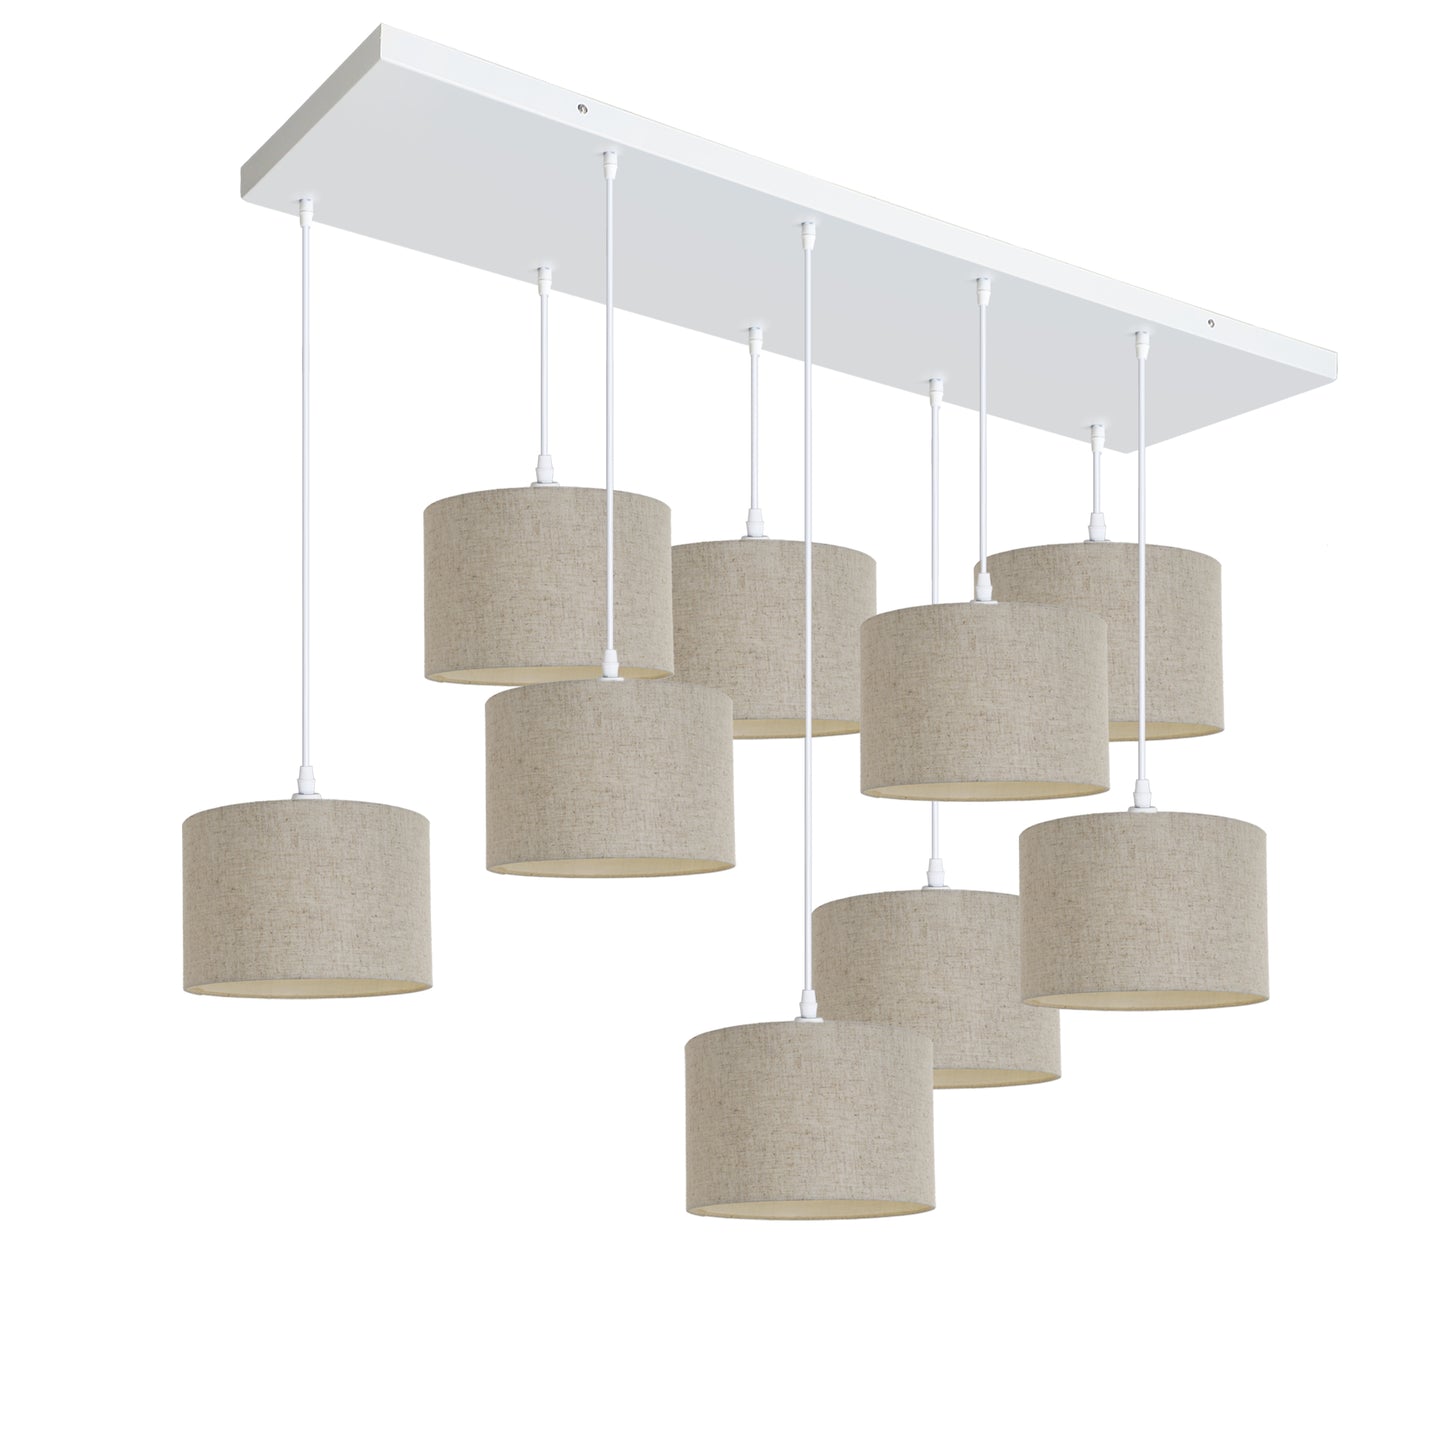 Murano 9 Light Pendant with Woven Hand Made Fabric Shades